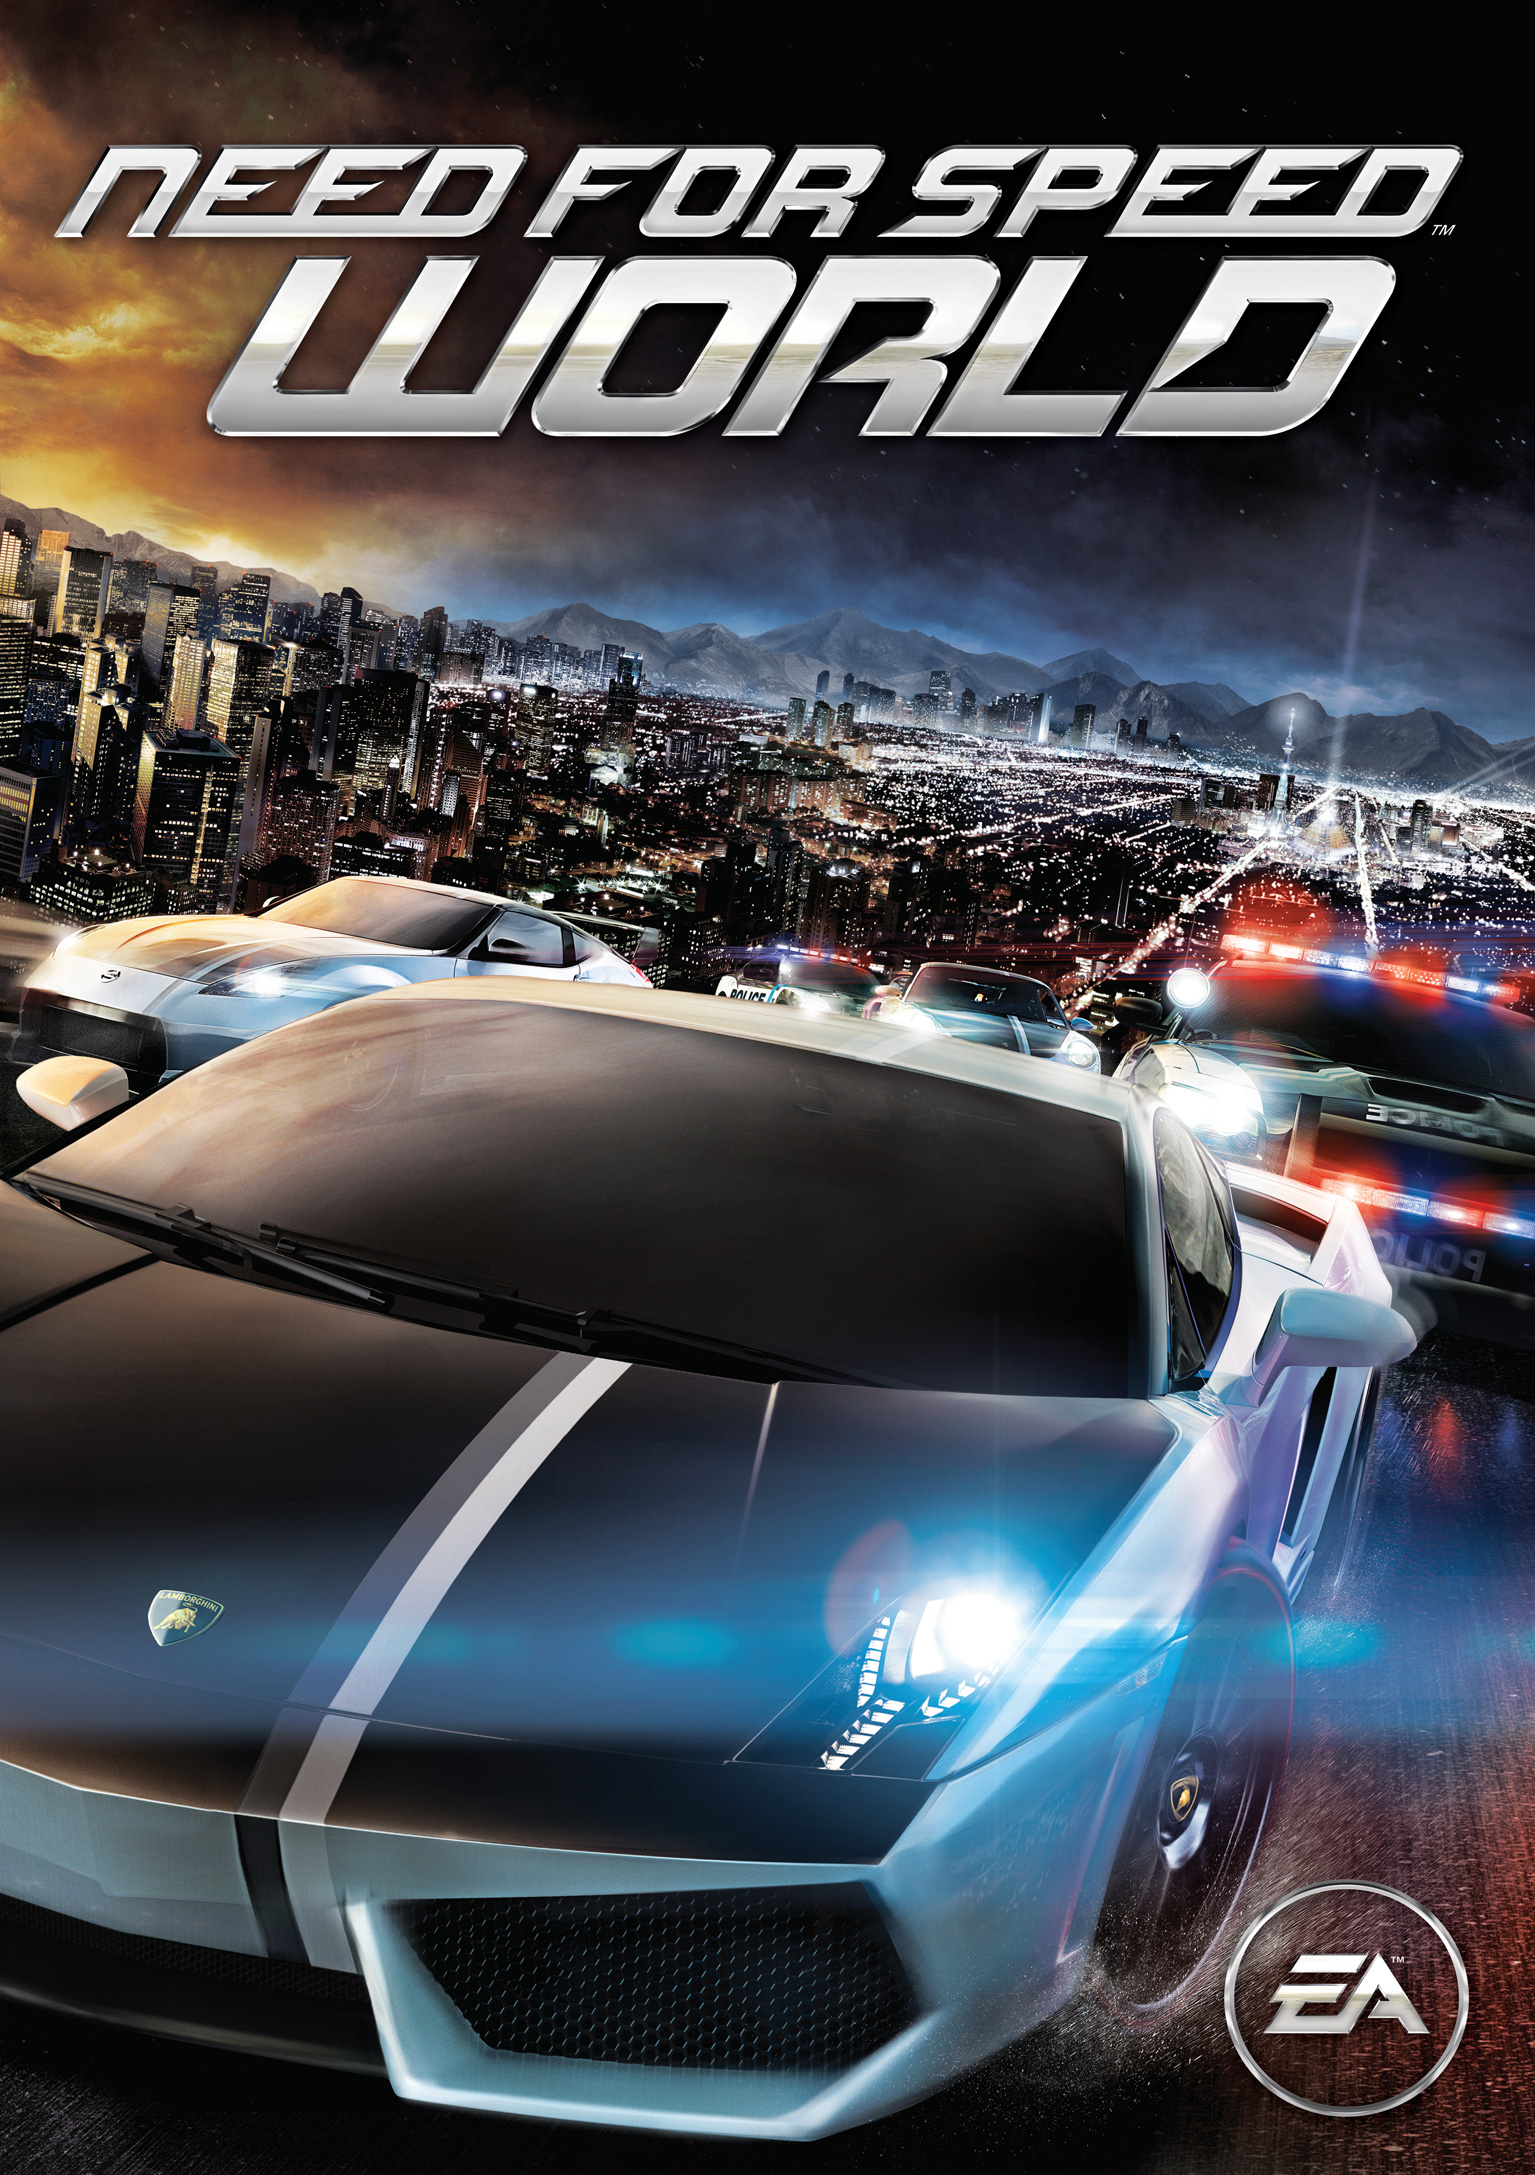 Need for Speed: World - pedn DVD obal